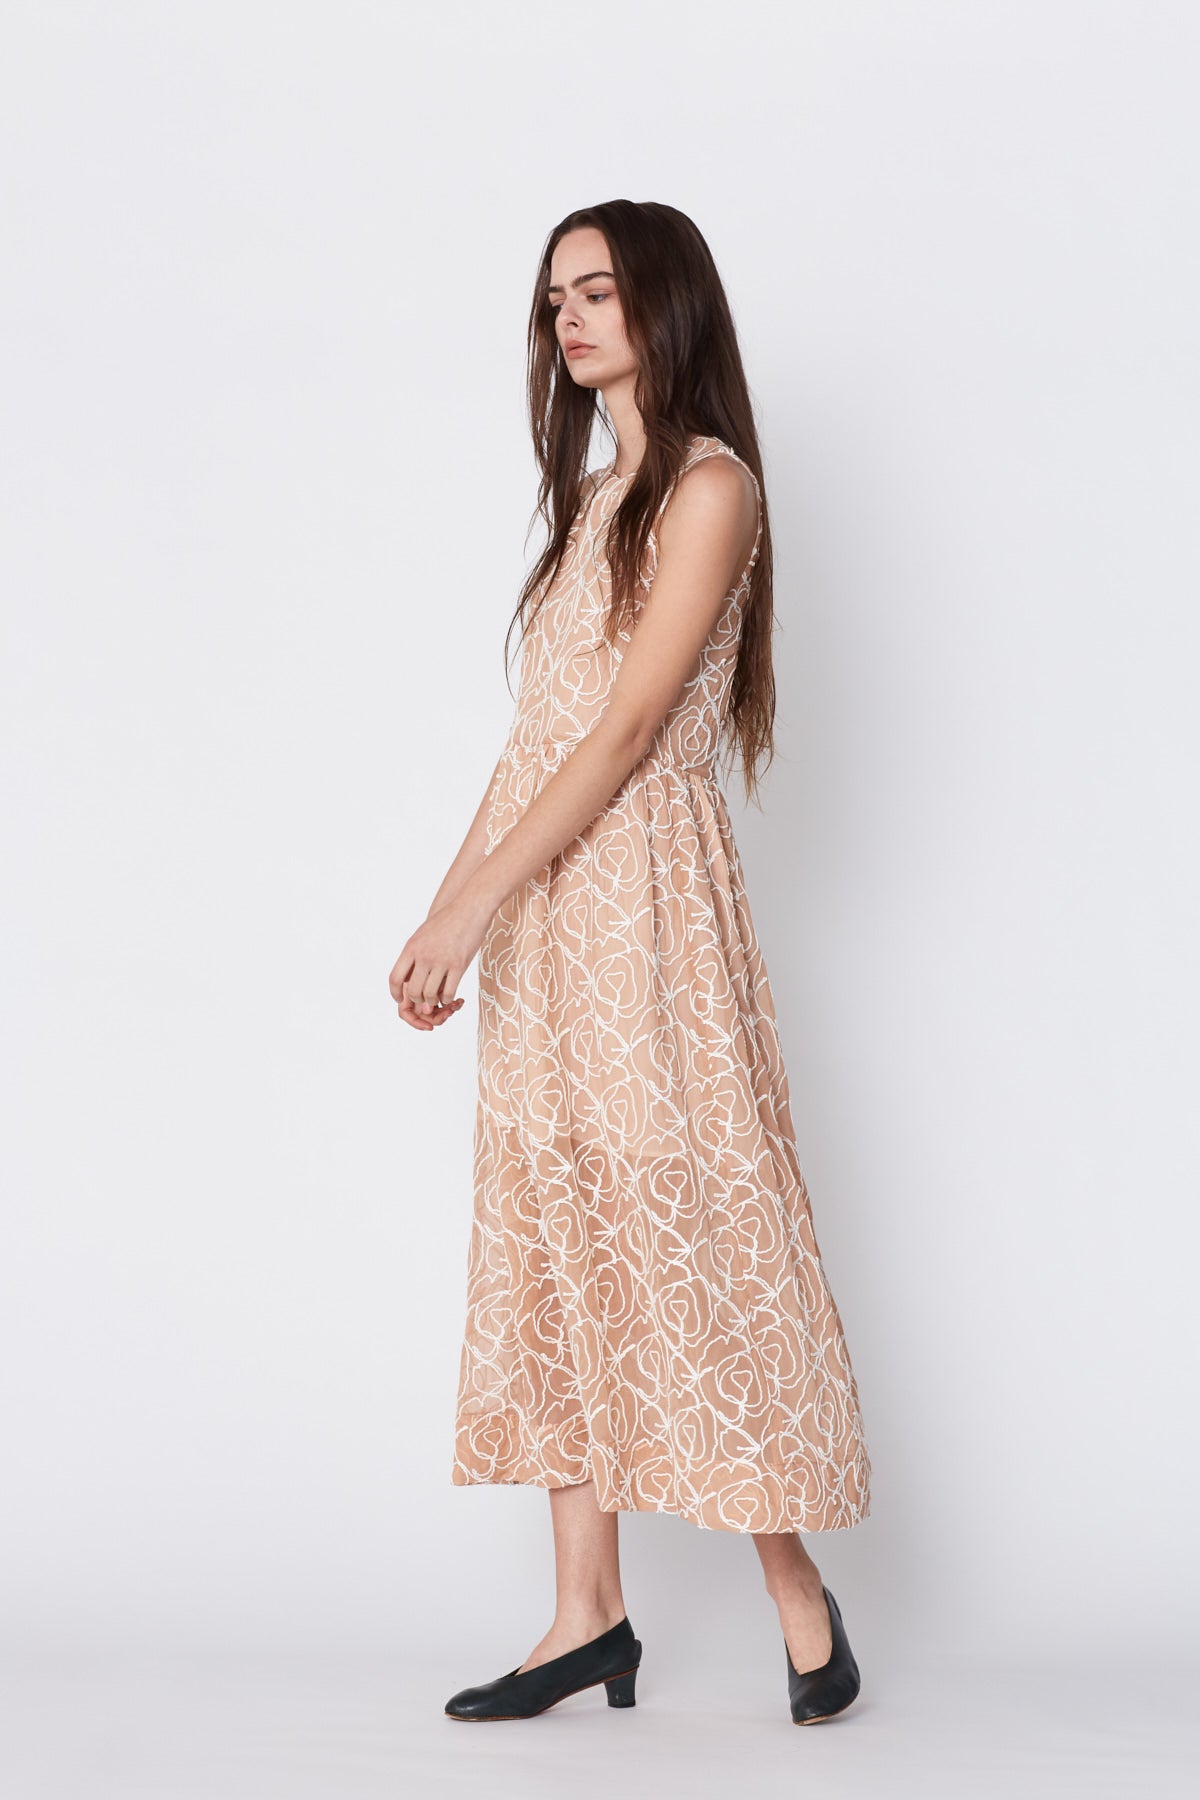 Sonny Dress in Italian Silk Chiffon with Cotton Rope Embroidery. Made in Atlanta, ethically and sustainably, by slow fashion designer Megan Huntz. 